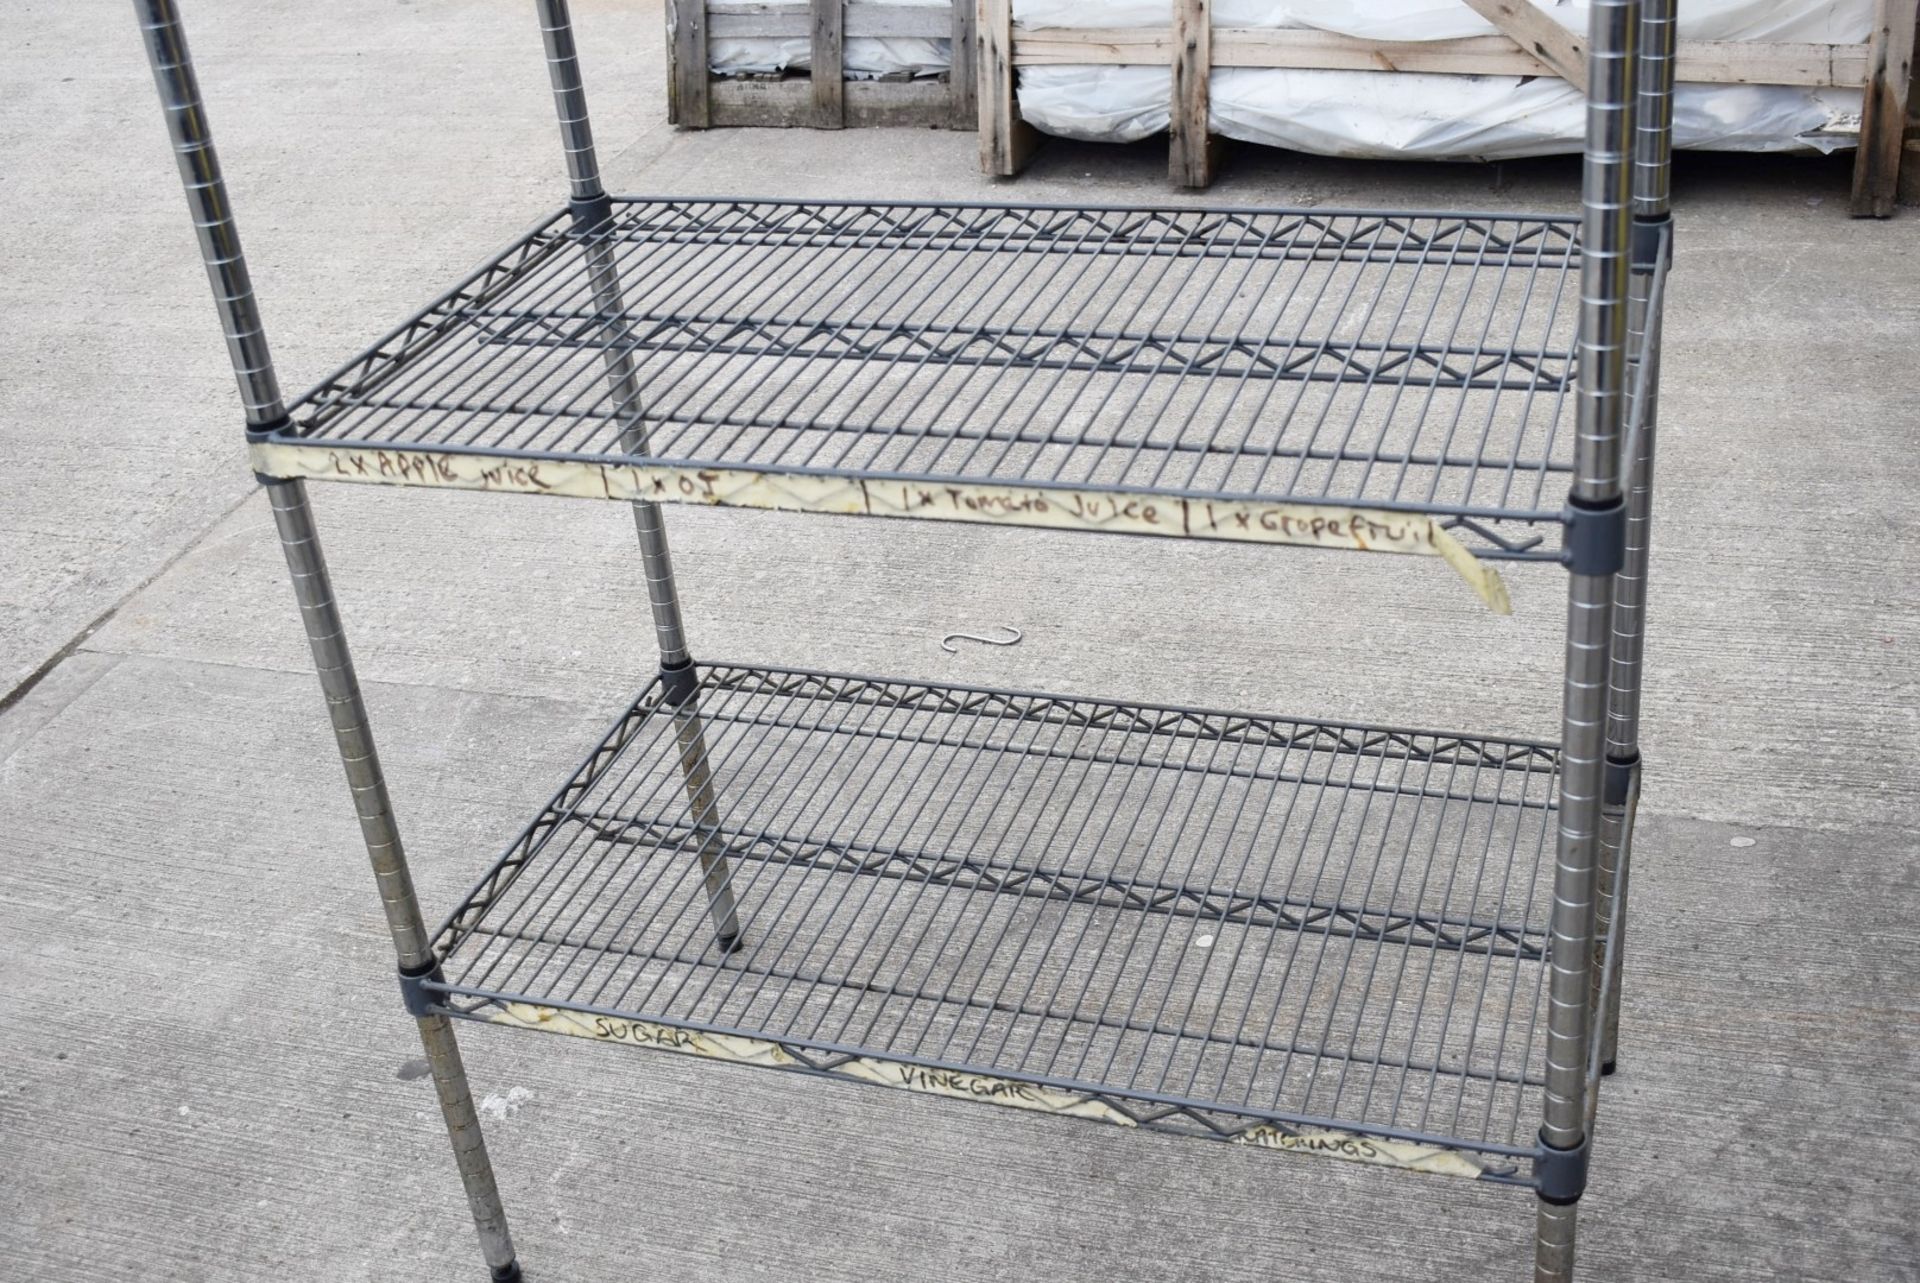 1 x Commercial Kitchen Wire Storage Shelf - Dimensions: H128x W90 x D50 cms - CL740 - Ref: - Image 3 of 5